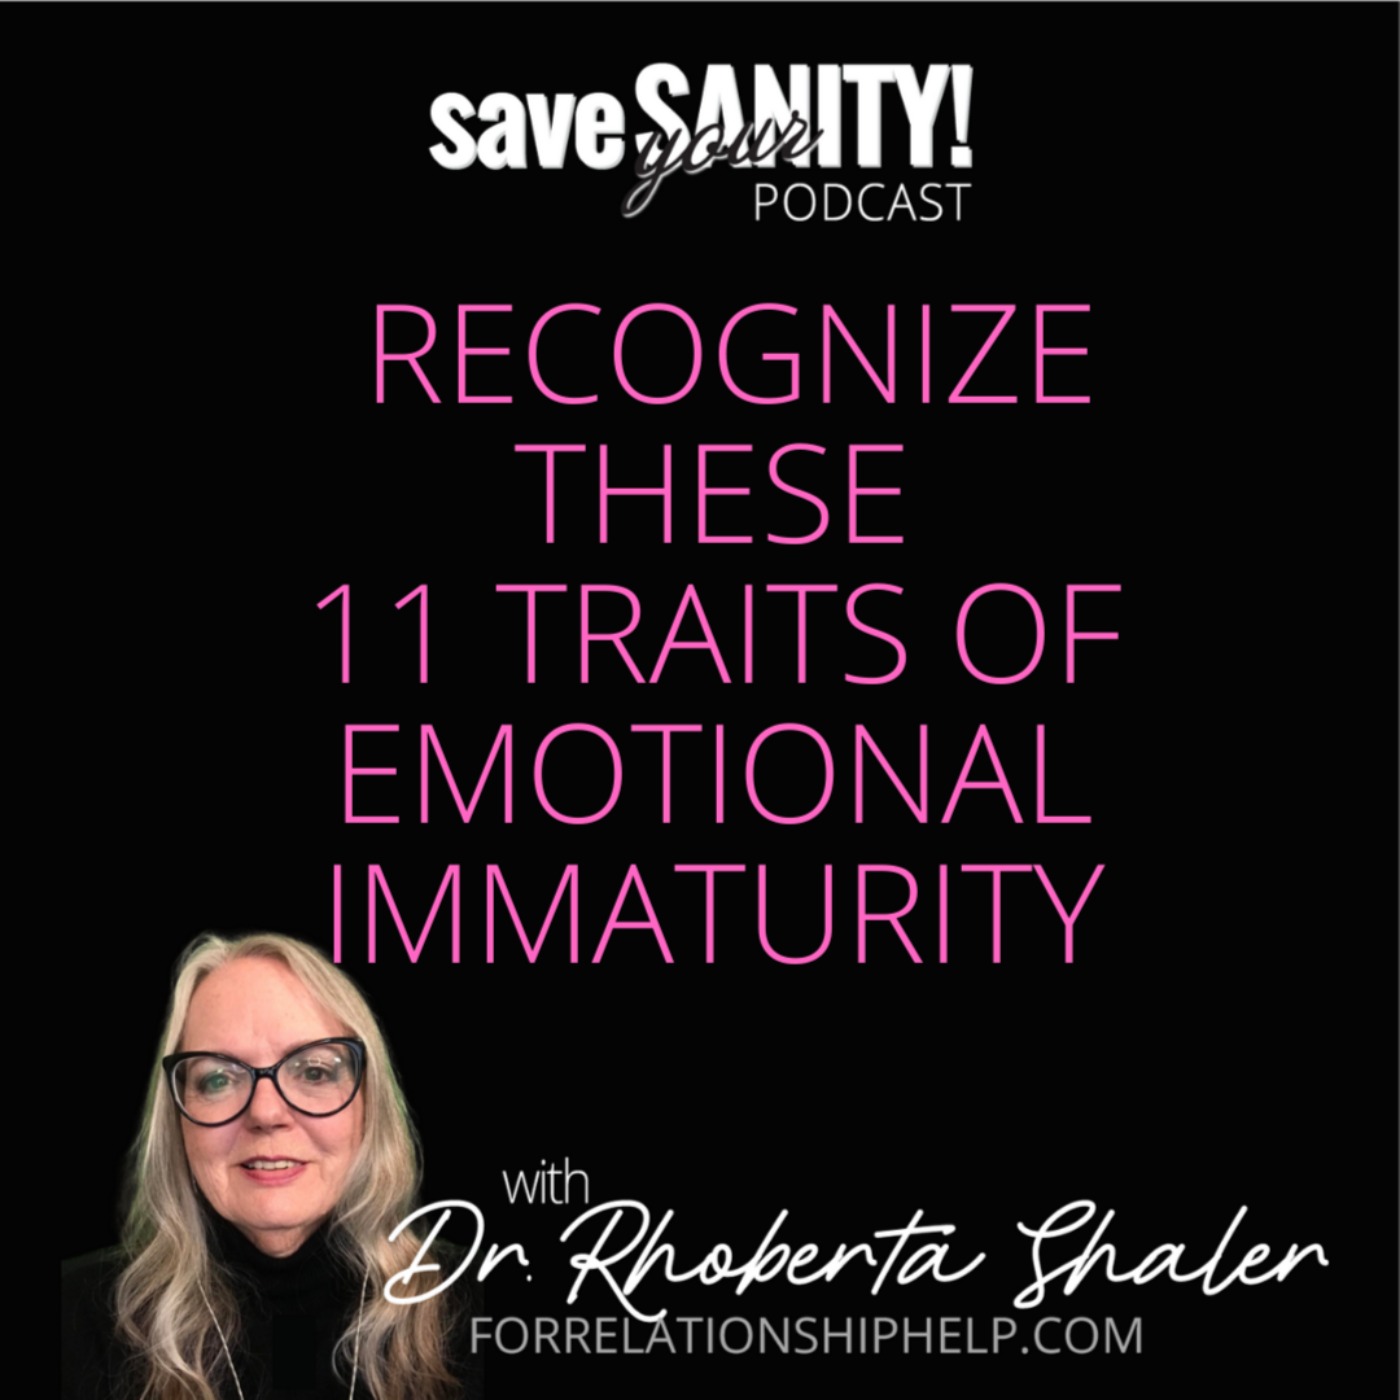 Recognize These 11 Traits of Emotional Immaturity